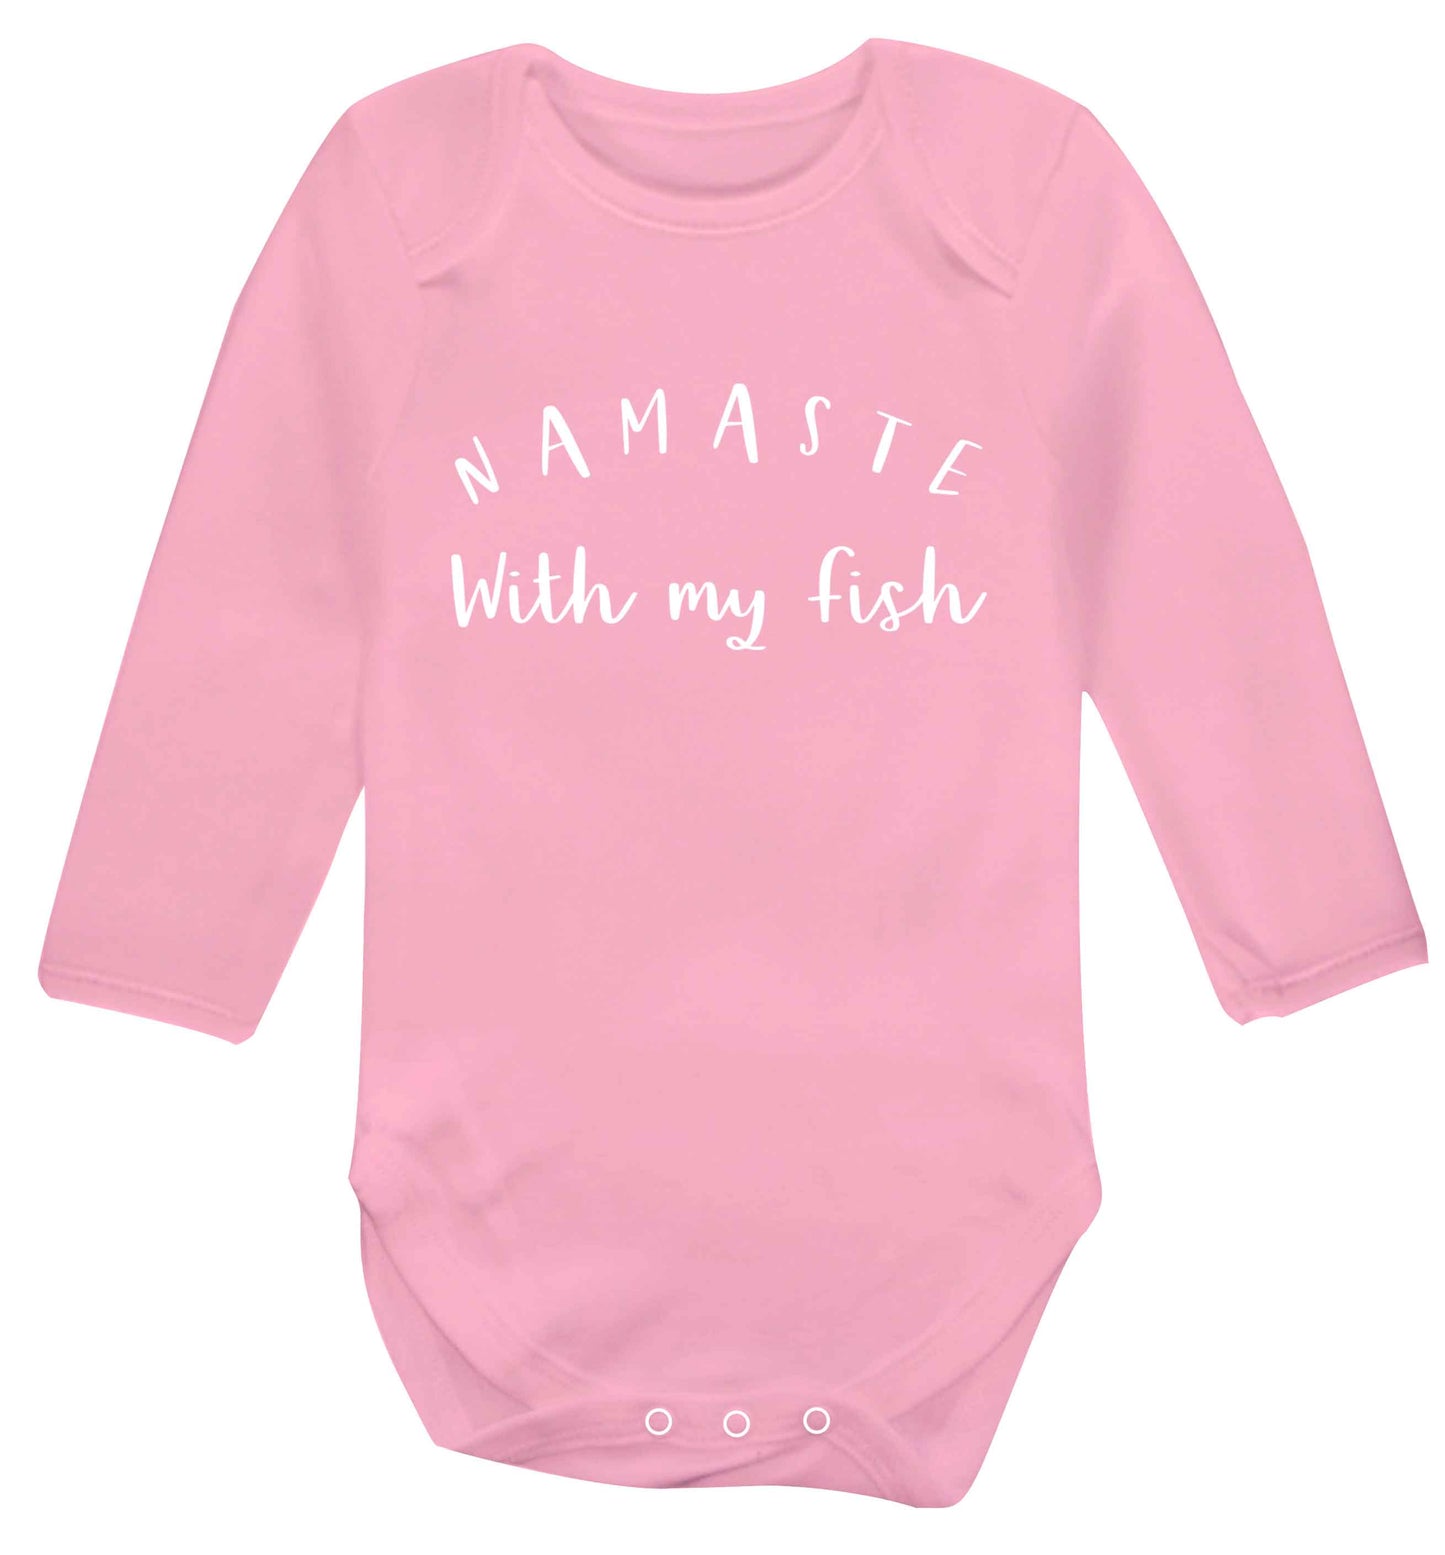 Namaste with my fish Baby Vest long sleeved pale pink 6-12 months